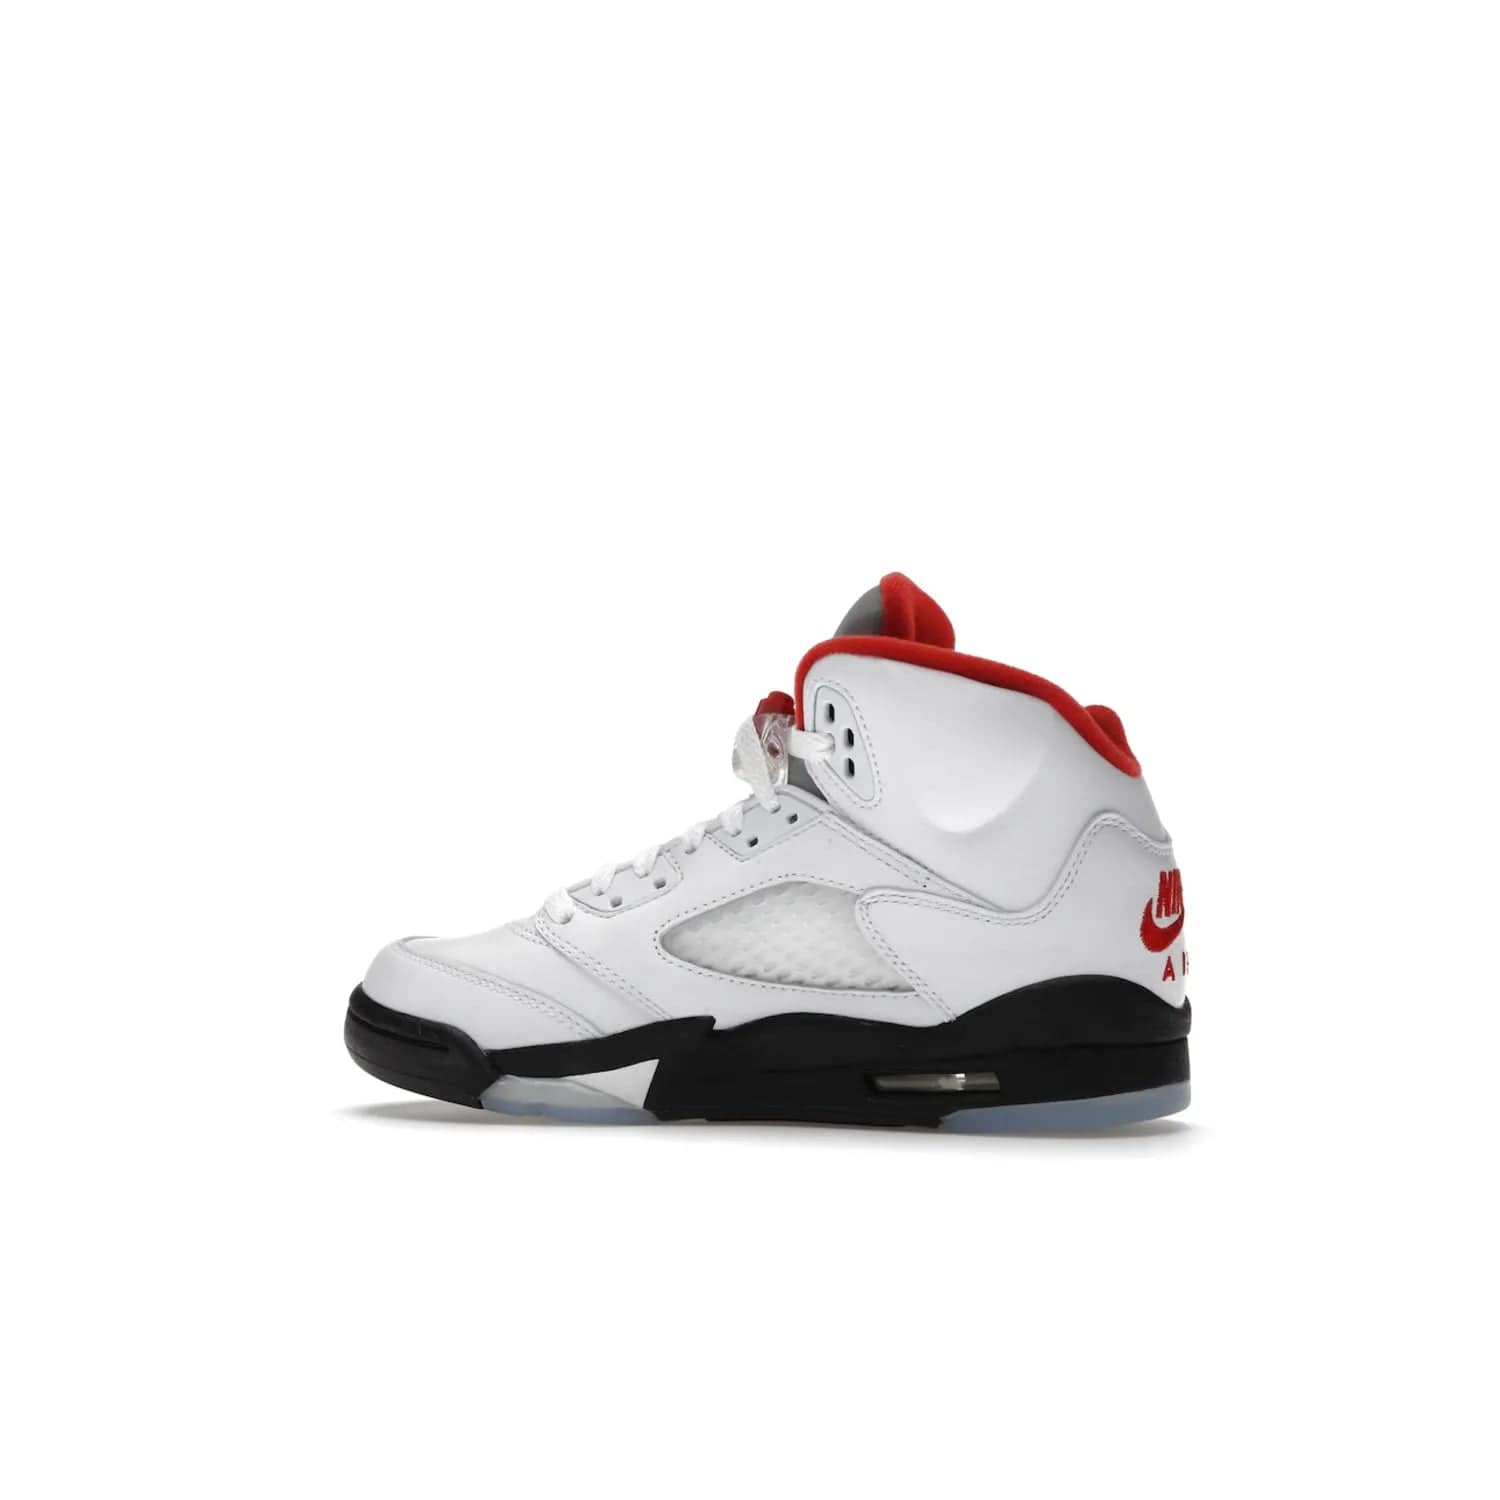 Jordan 5 Retro Fire Red Silver Tongue (2020) (GS) - Image 21 - Only at www.BallersClubKickz.com - A stylish option for any grade schooler. The Air Jordan 5 Retro Fire Red Silver Tongue 2020 GS features a combination of four hues, premium white leather, a clear mesh mid-upper and a reflective silver tongue. An icy translucent blue outsole completes the look. Available on May 2, $150.